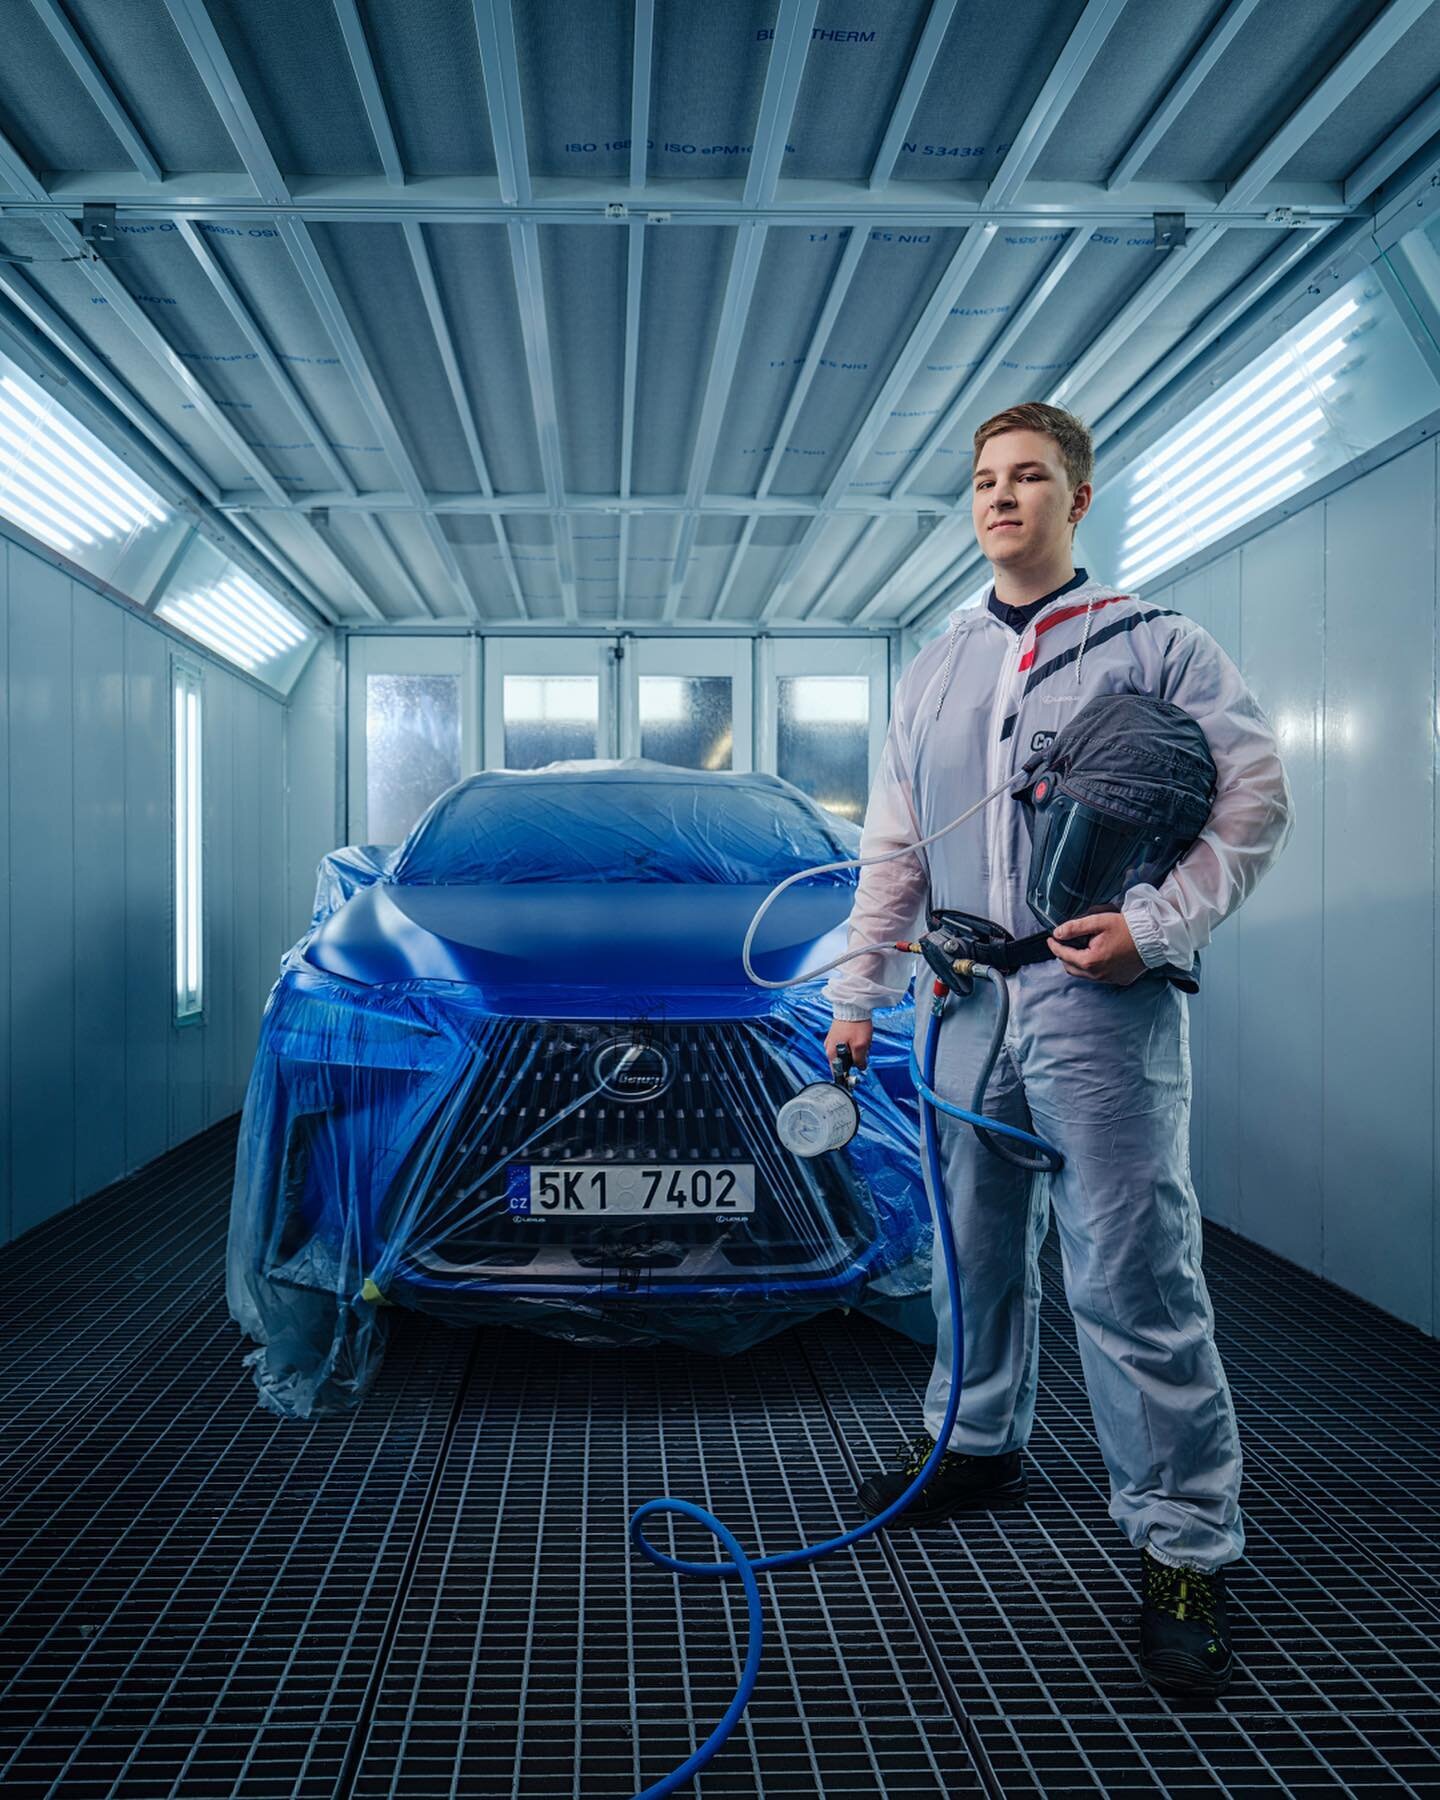 We are thrilled we got the opportunity to shoot a hiring campaign for @toyotaceskarepublika and @lexuscz and capture the essence of working for such brands. 
Special thanks goes to @autoeder_kv who provided us with a great cast and space.

video: @yo